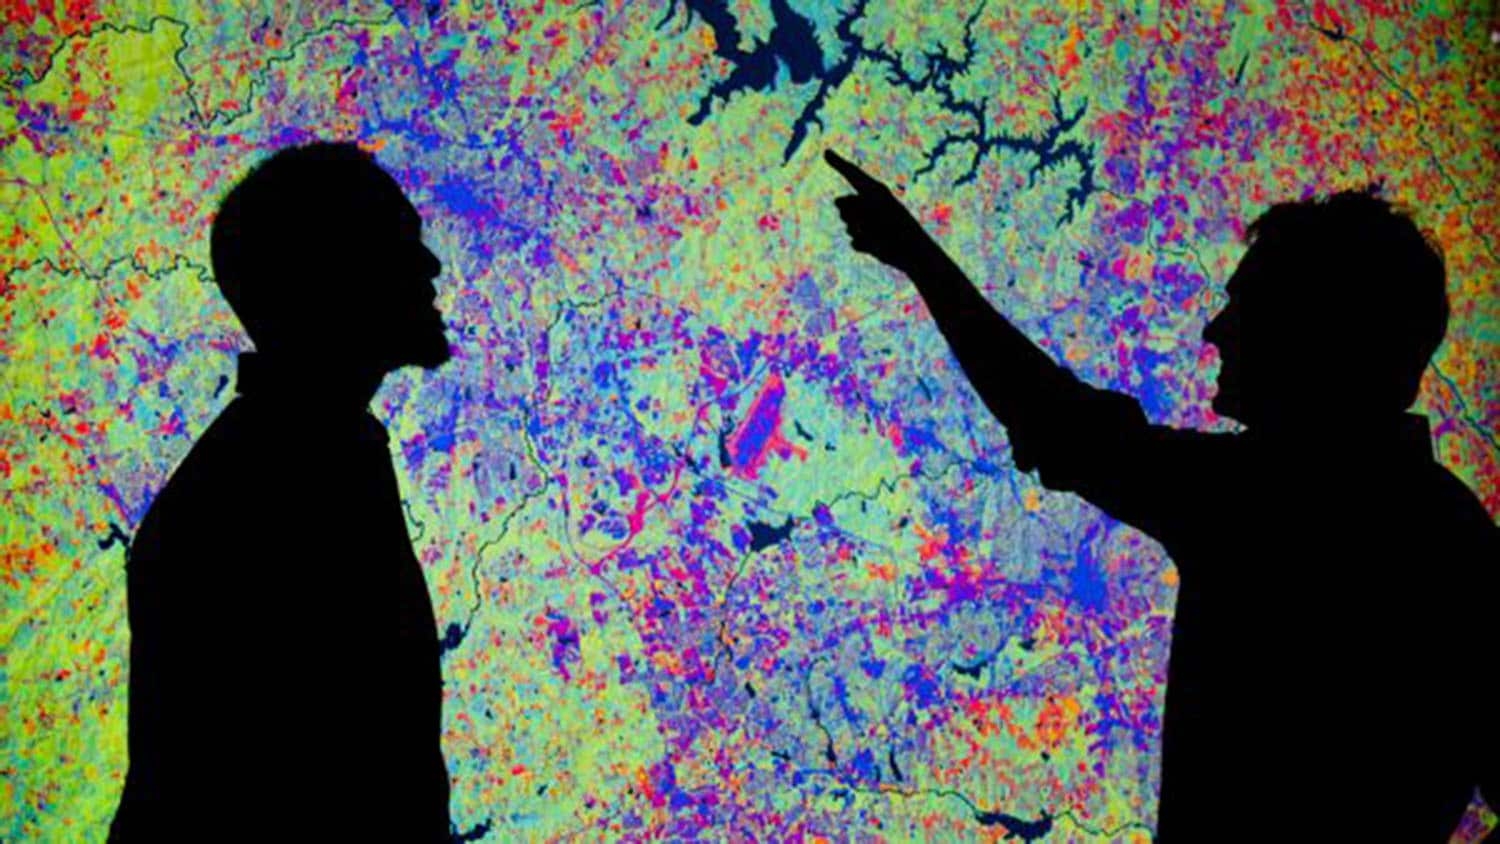 Two researchers appear as silhouettes in front of a screen showing a digital heat map filled with greens, blues, reds, oranges and various other shades of colors.